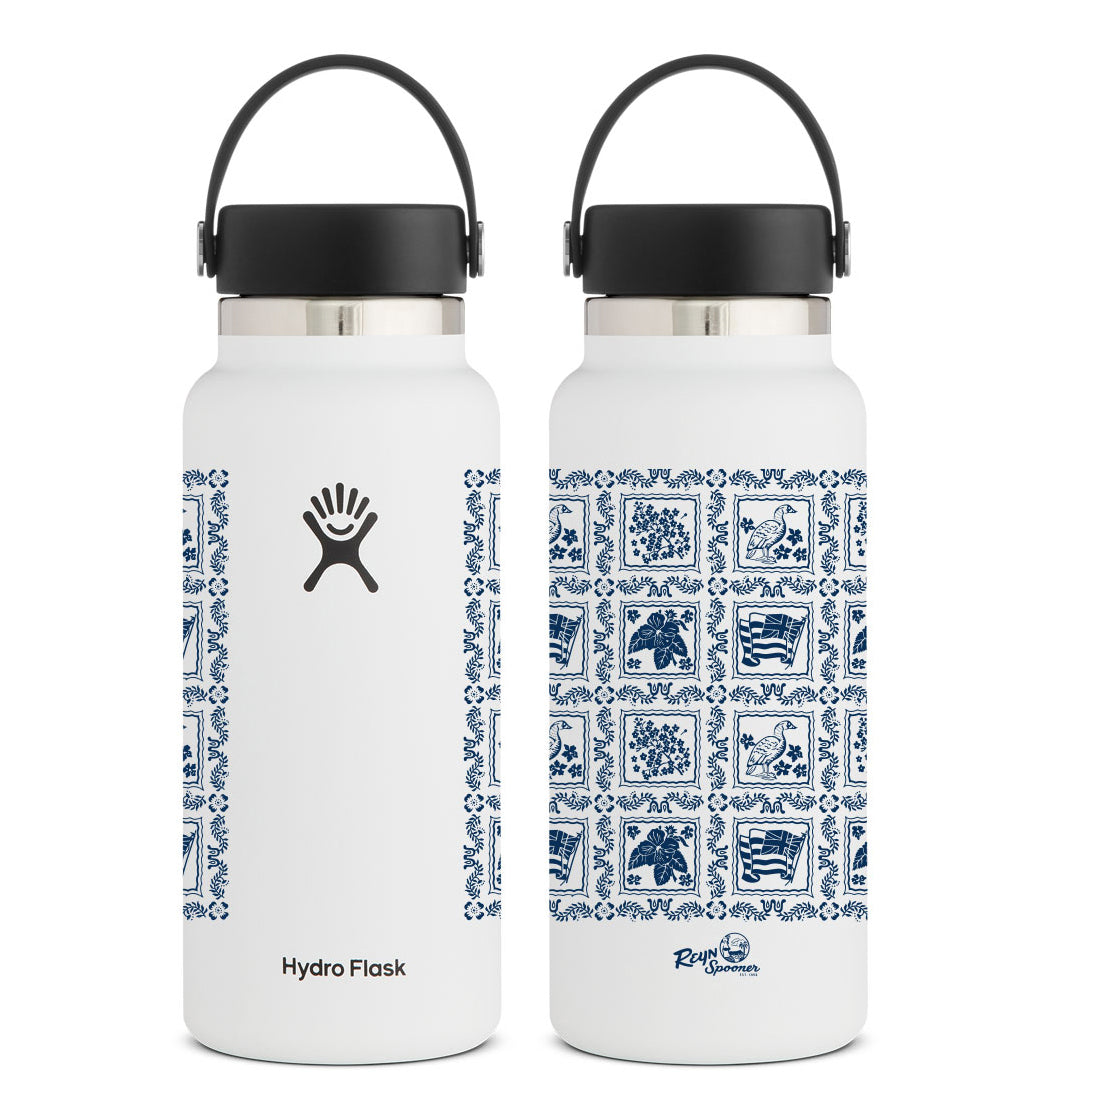 Hydro Flask Other Items in Other